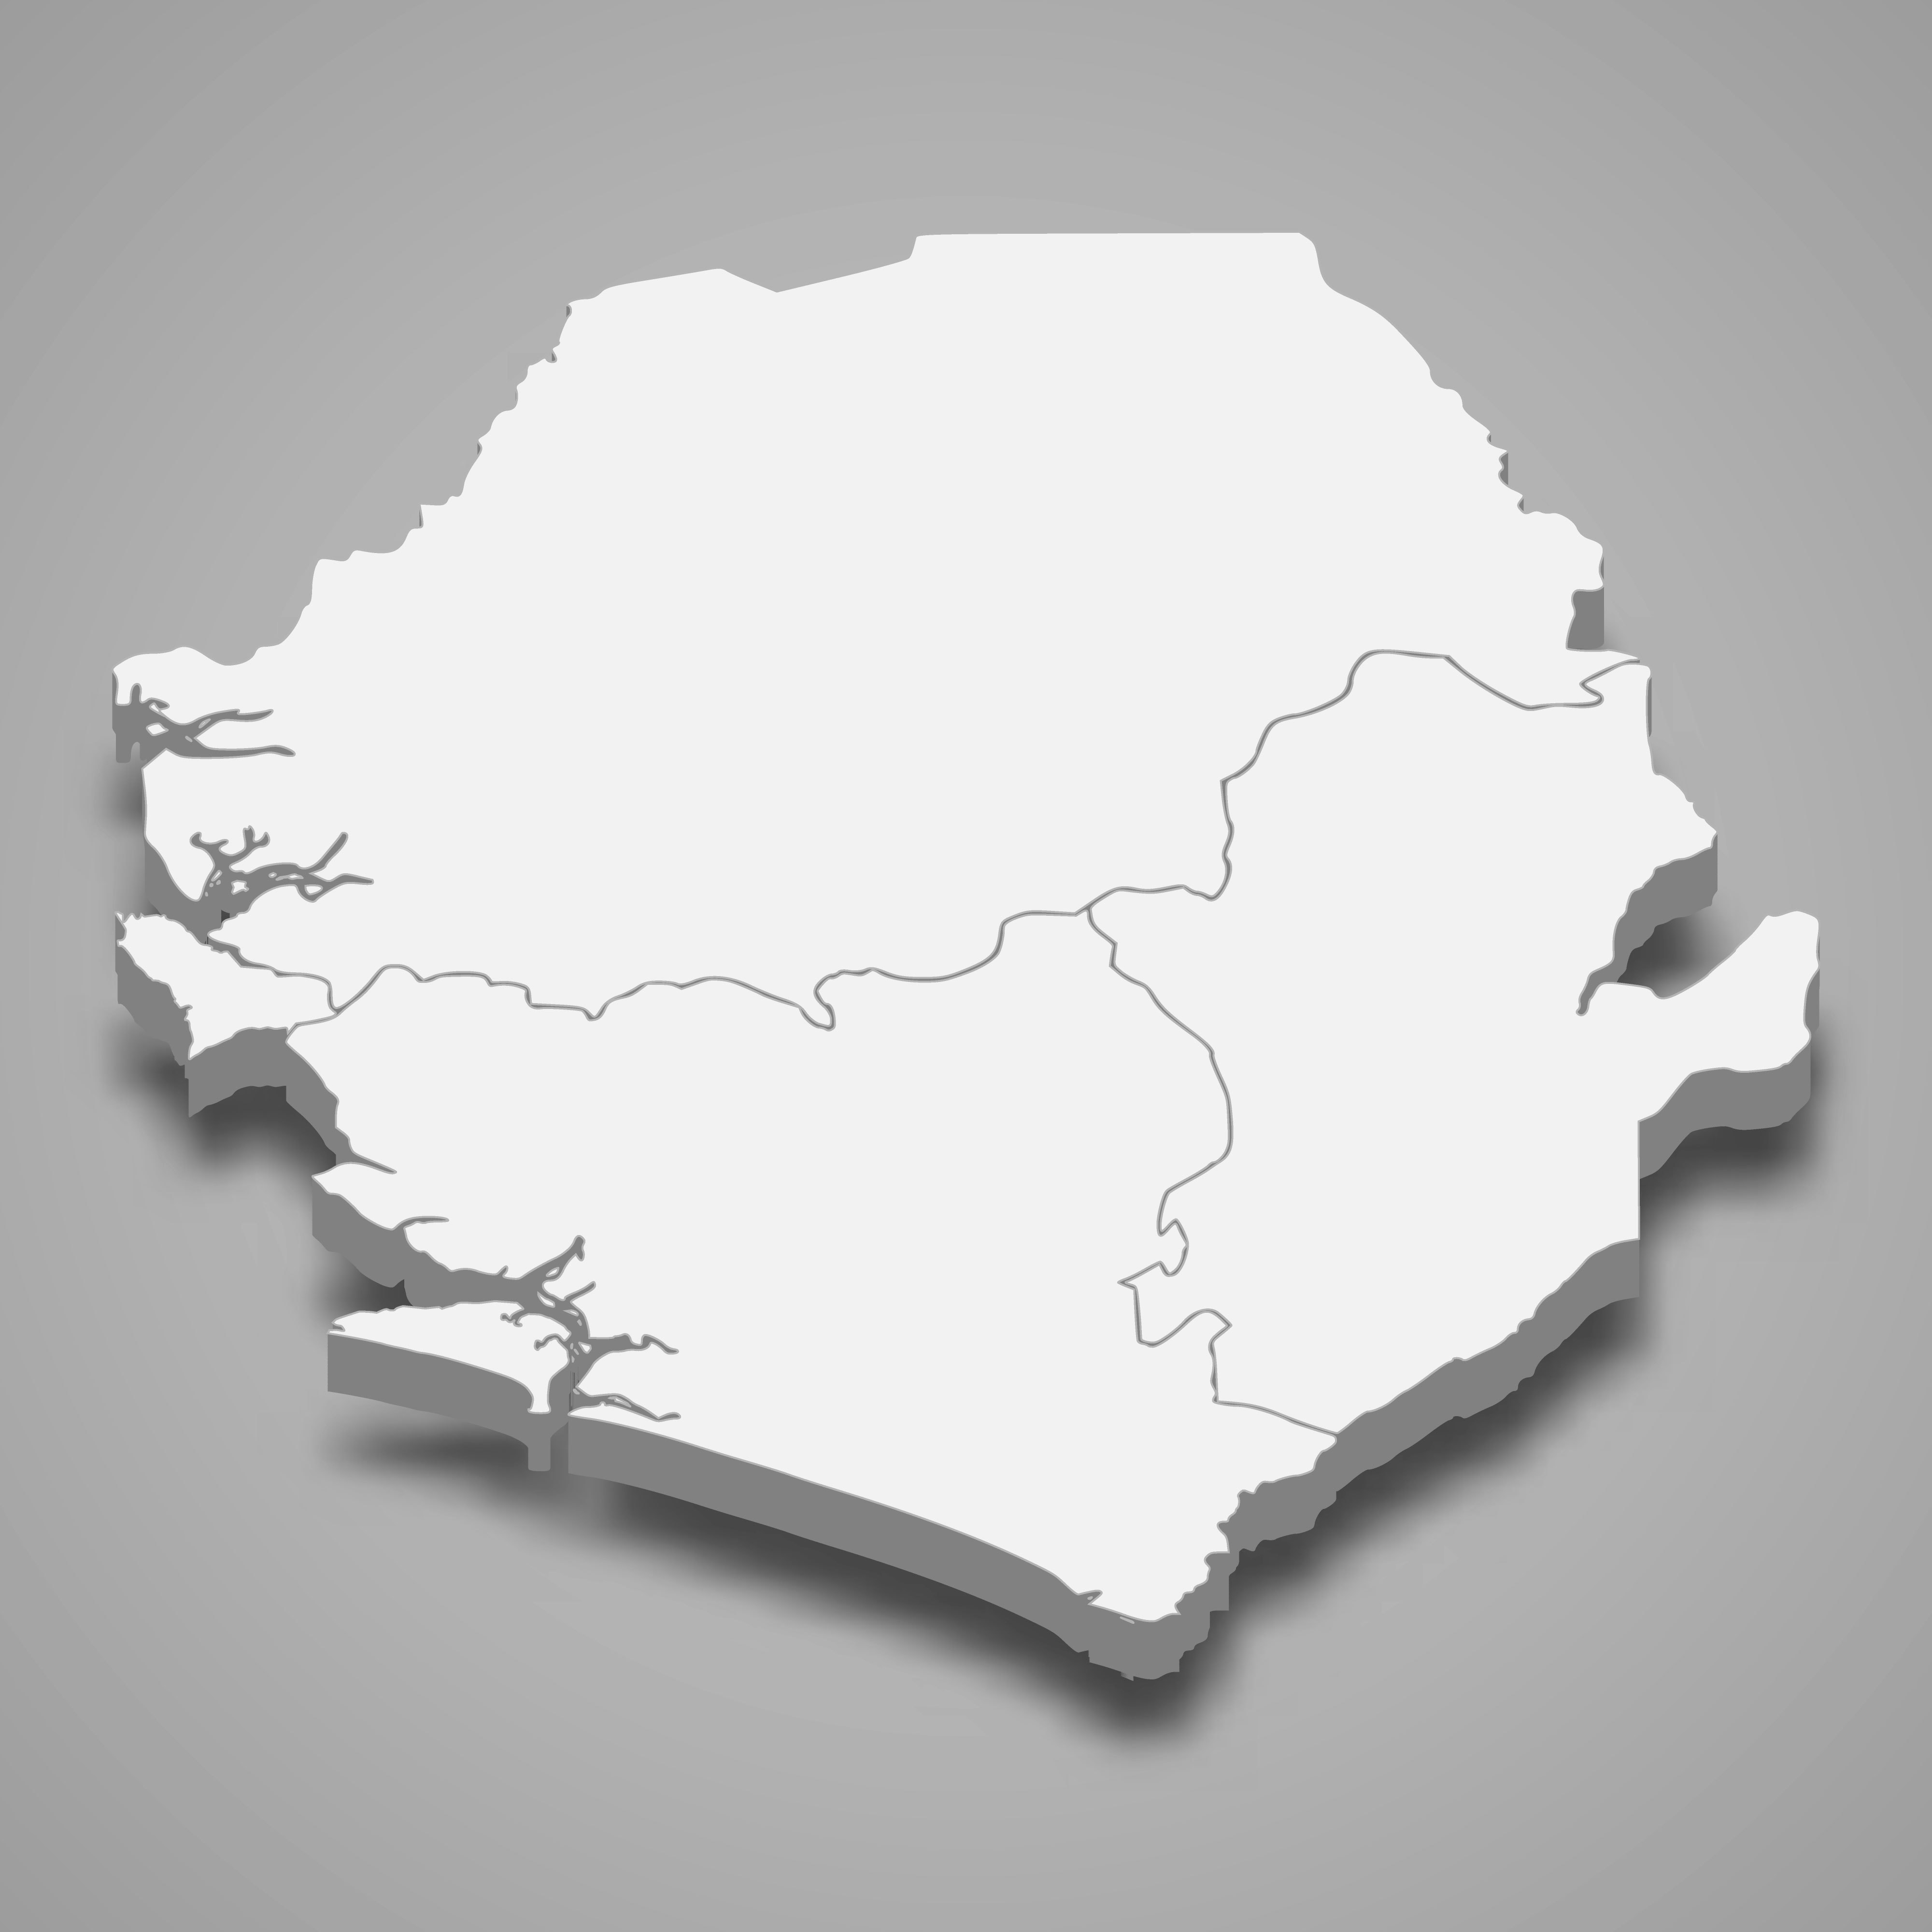 3d map of Sierra Leone with borders of regions. 3d map with borders of regions Template for your design